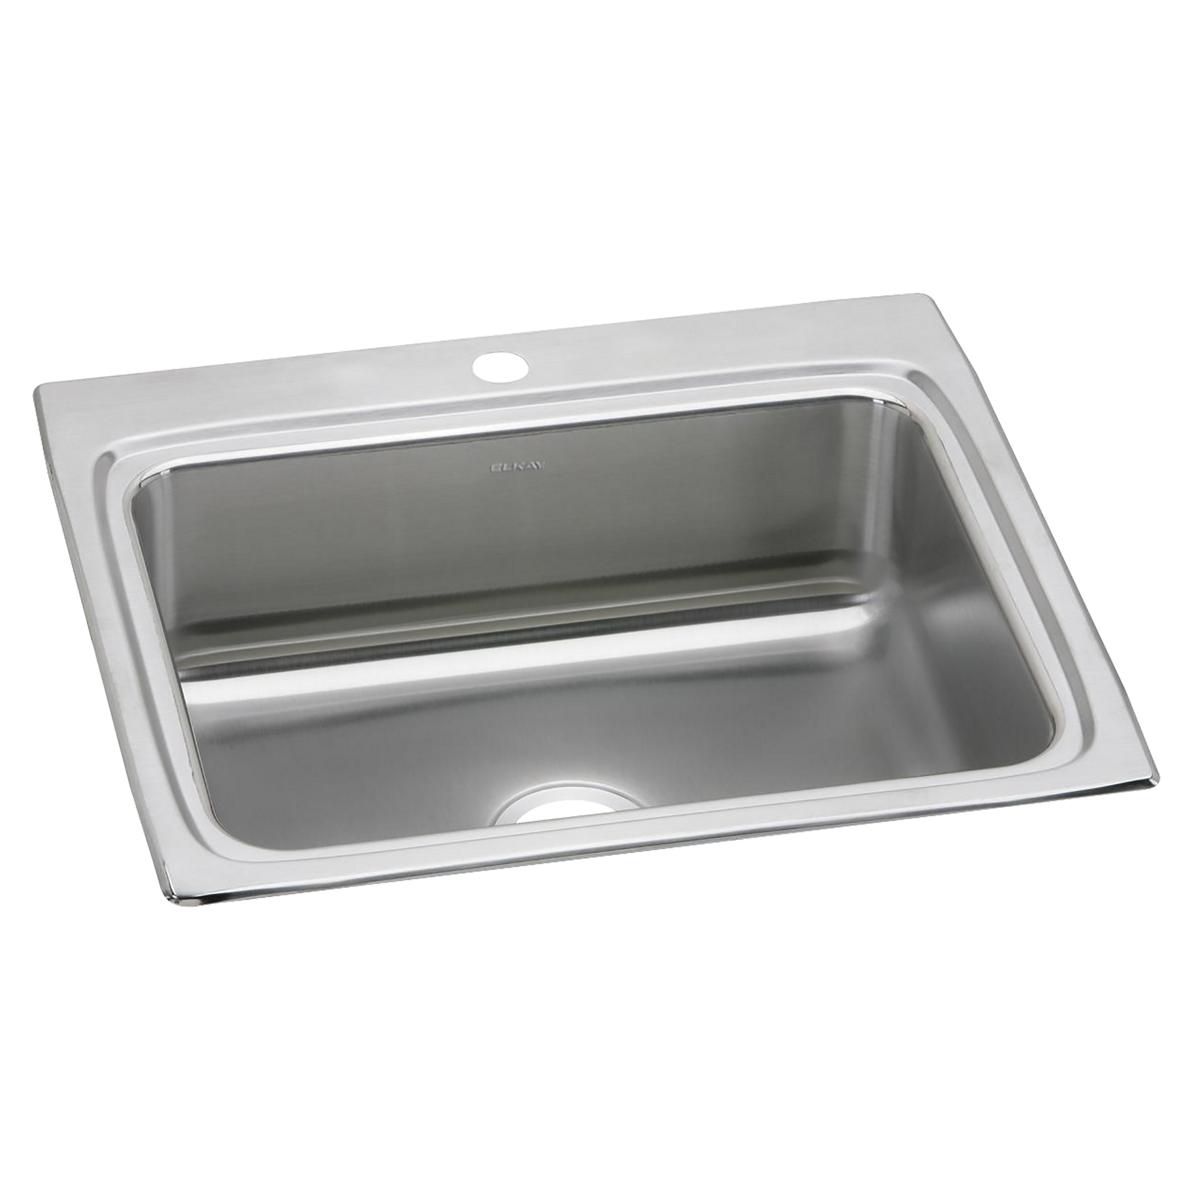 Elkay Lustertone Classic 25" x 22" x 8-1/8" Single Bowl Drop-in Sink with Quick-clip